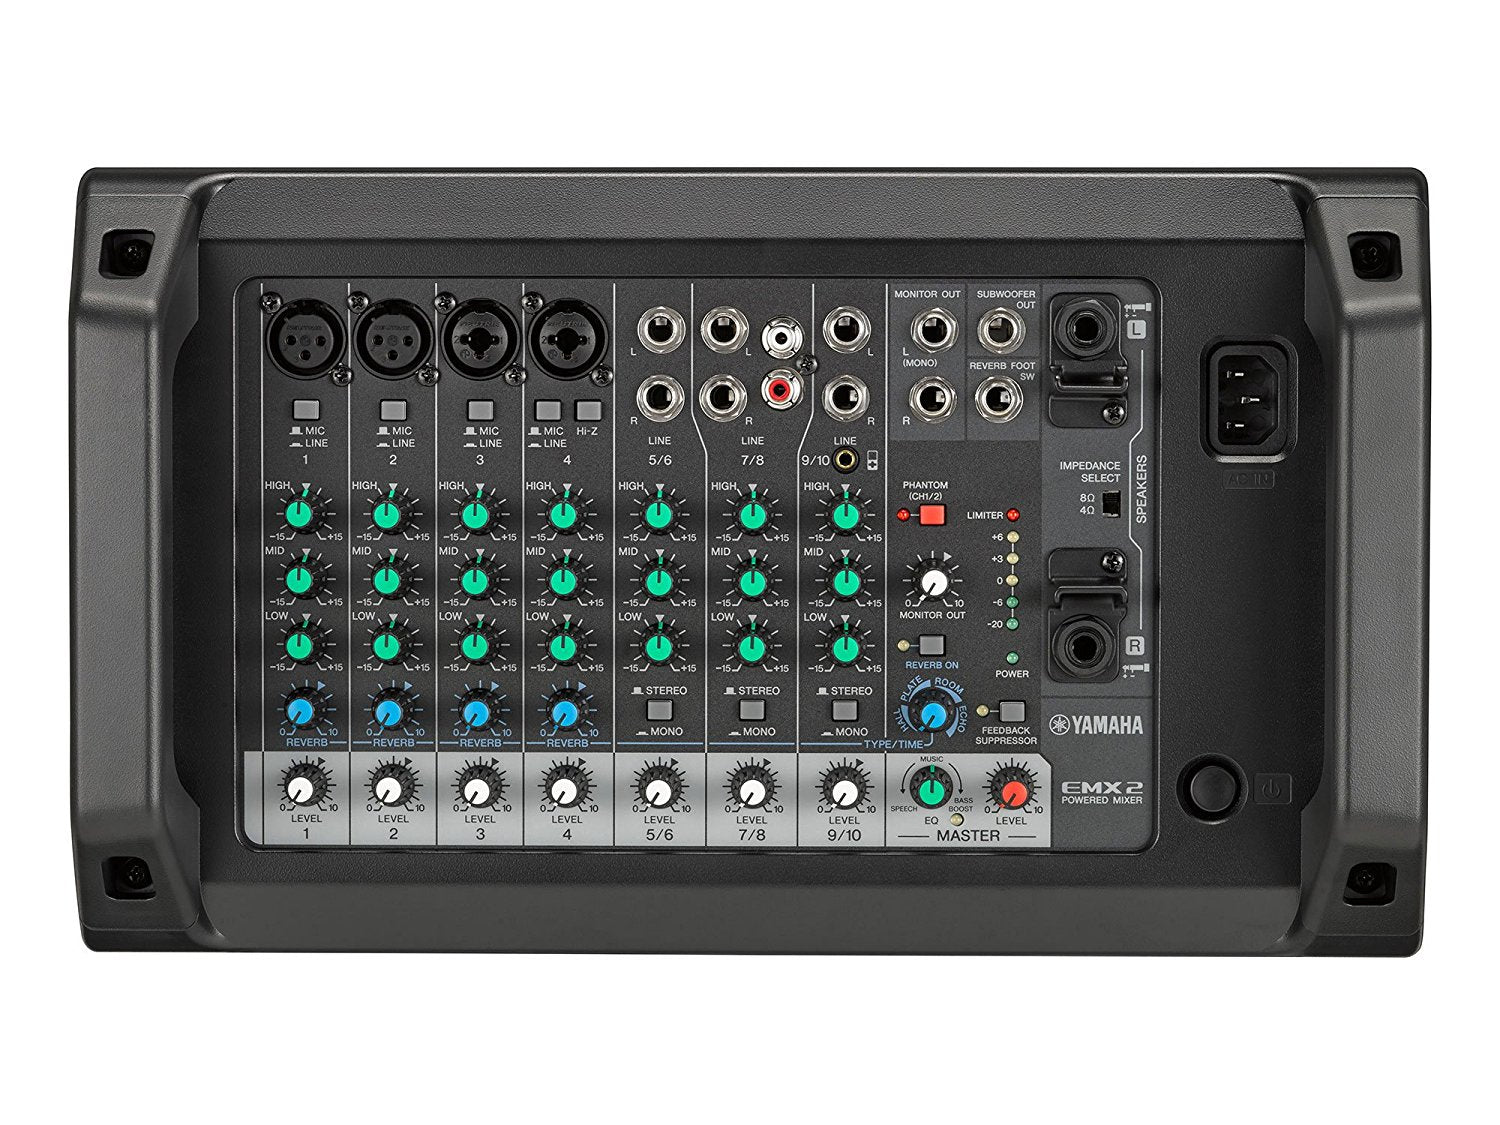 YAMAHA EMX2 10-INPUT STEREO POWERED MIXER WITH DSP EFFECTS, YAMAHA, MIXER, yamaha-emx2-10-input-stereo-powered-mixer-with-dsp-effects, ZOSO MUSIC SDN BHD